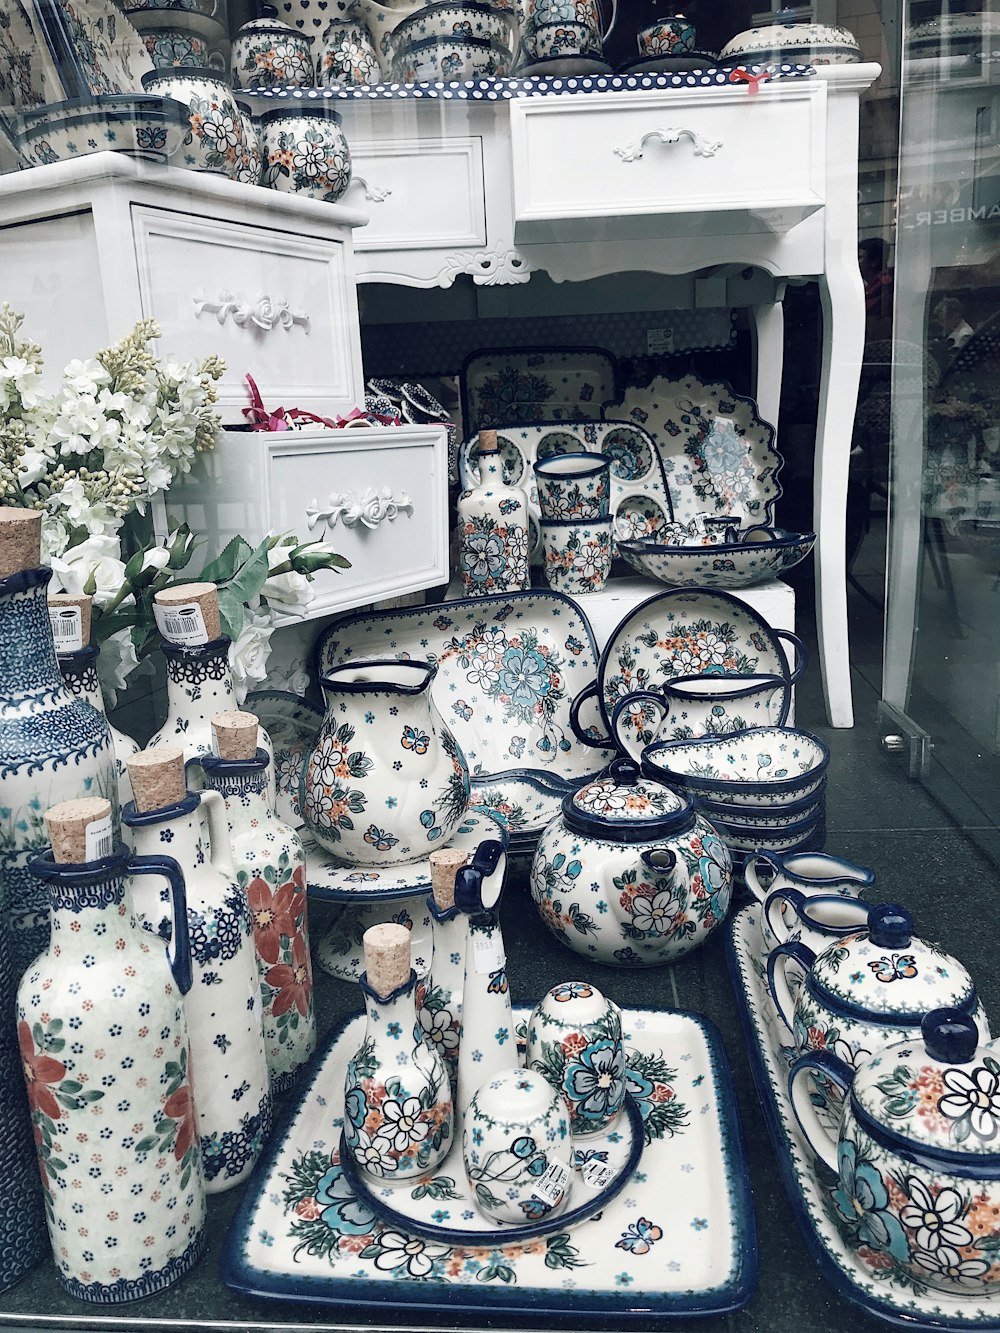 a collection of vases and dishes on display in a store window